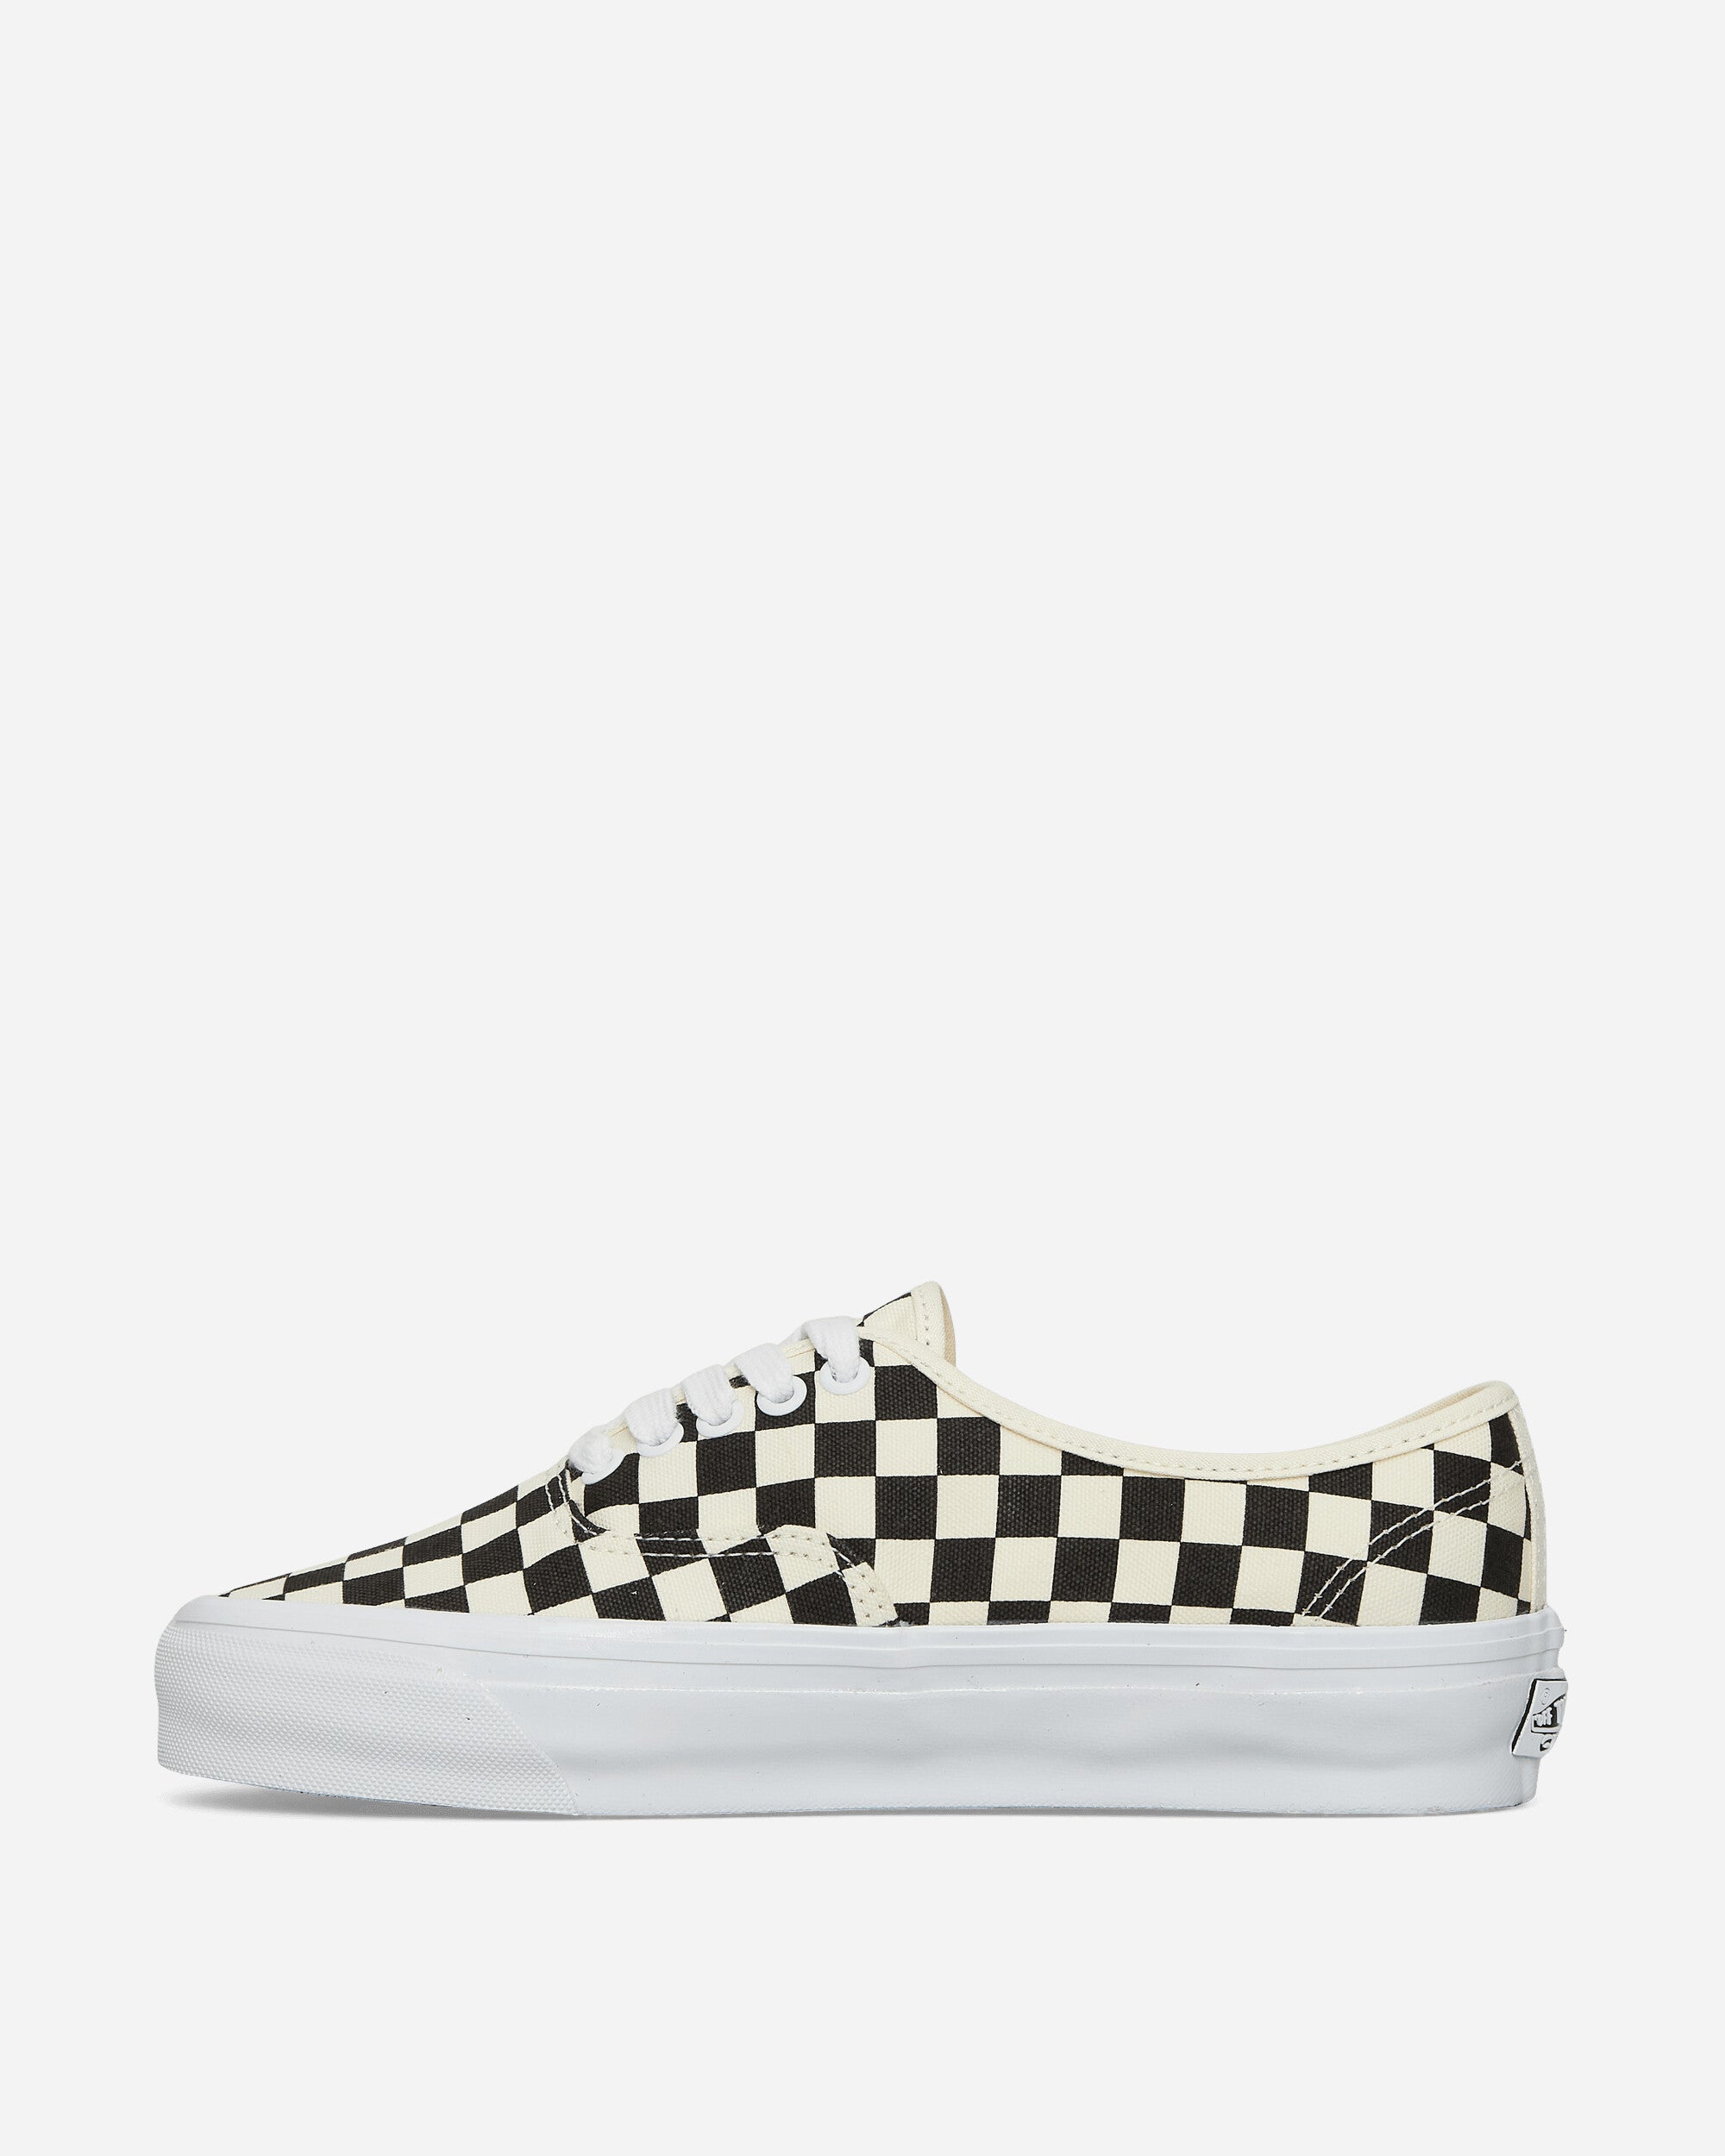 Vans Authentic Reissue 44 Checkerboard Black/Off White Sneakers Low VN000CQA2BO1